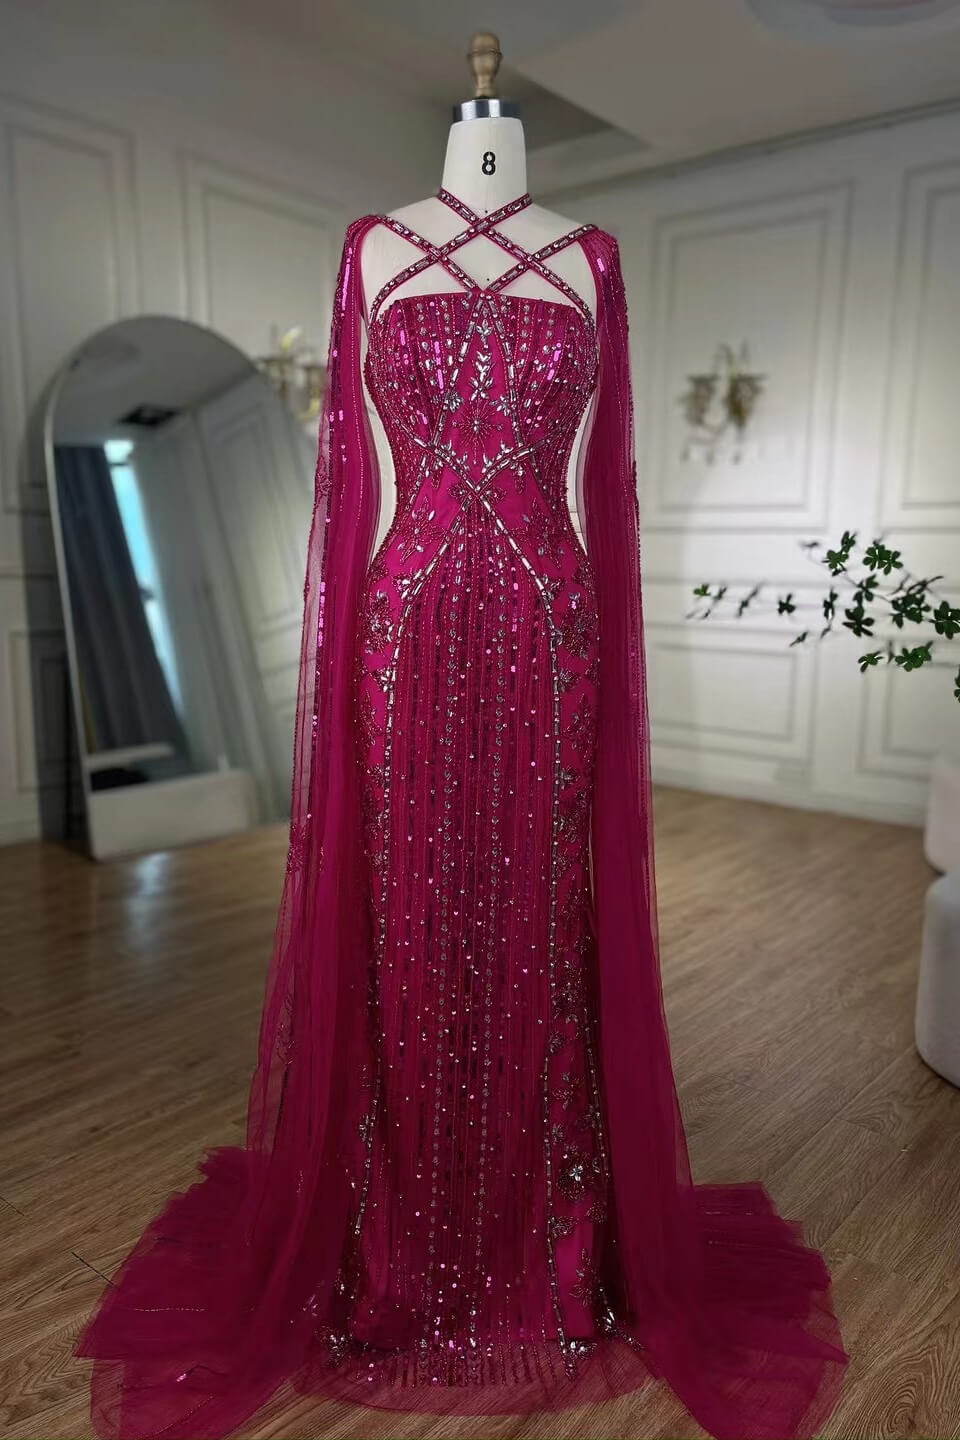 Luxury Fuchsia Crystal Mermaid Evening Gowns Long With Tulle Ruffles - lulusllly